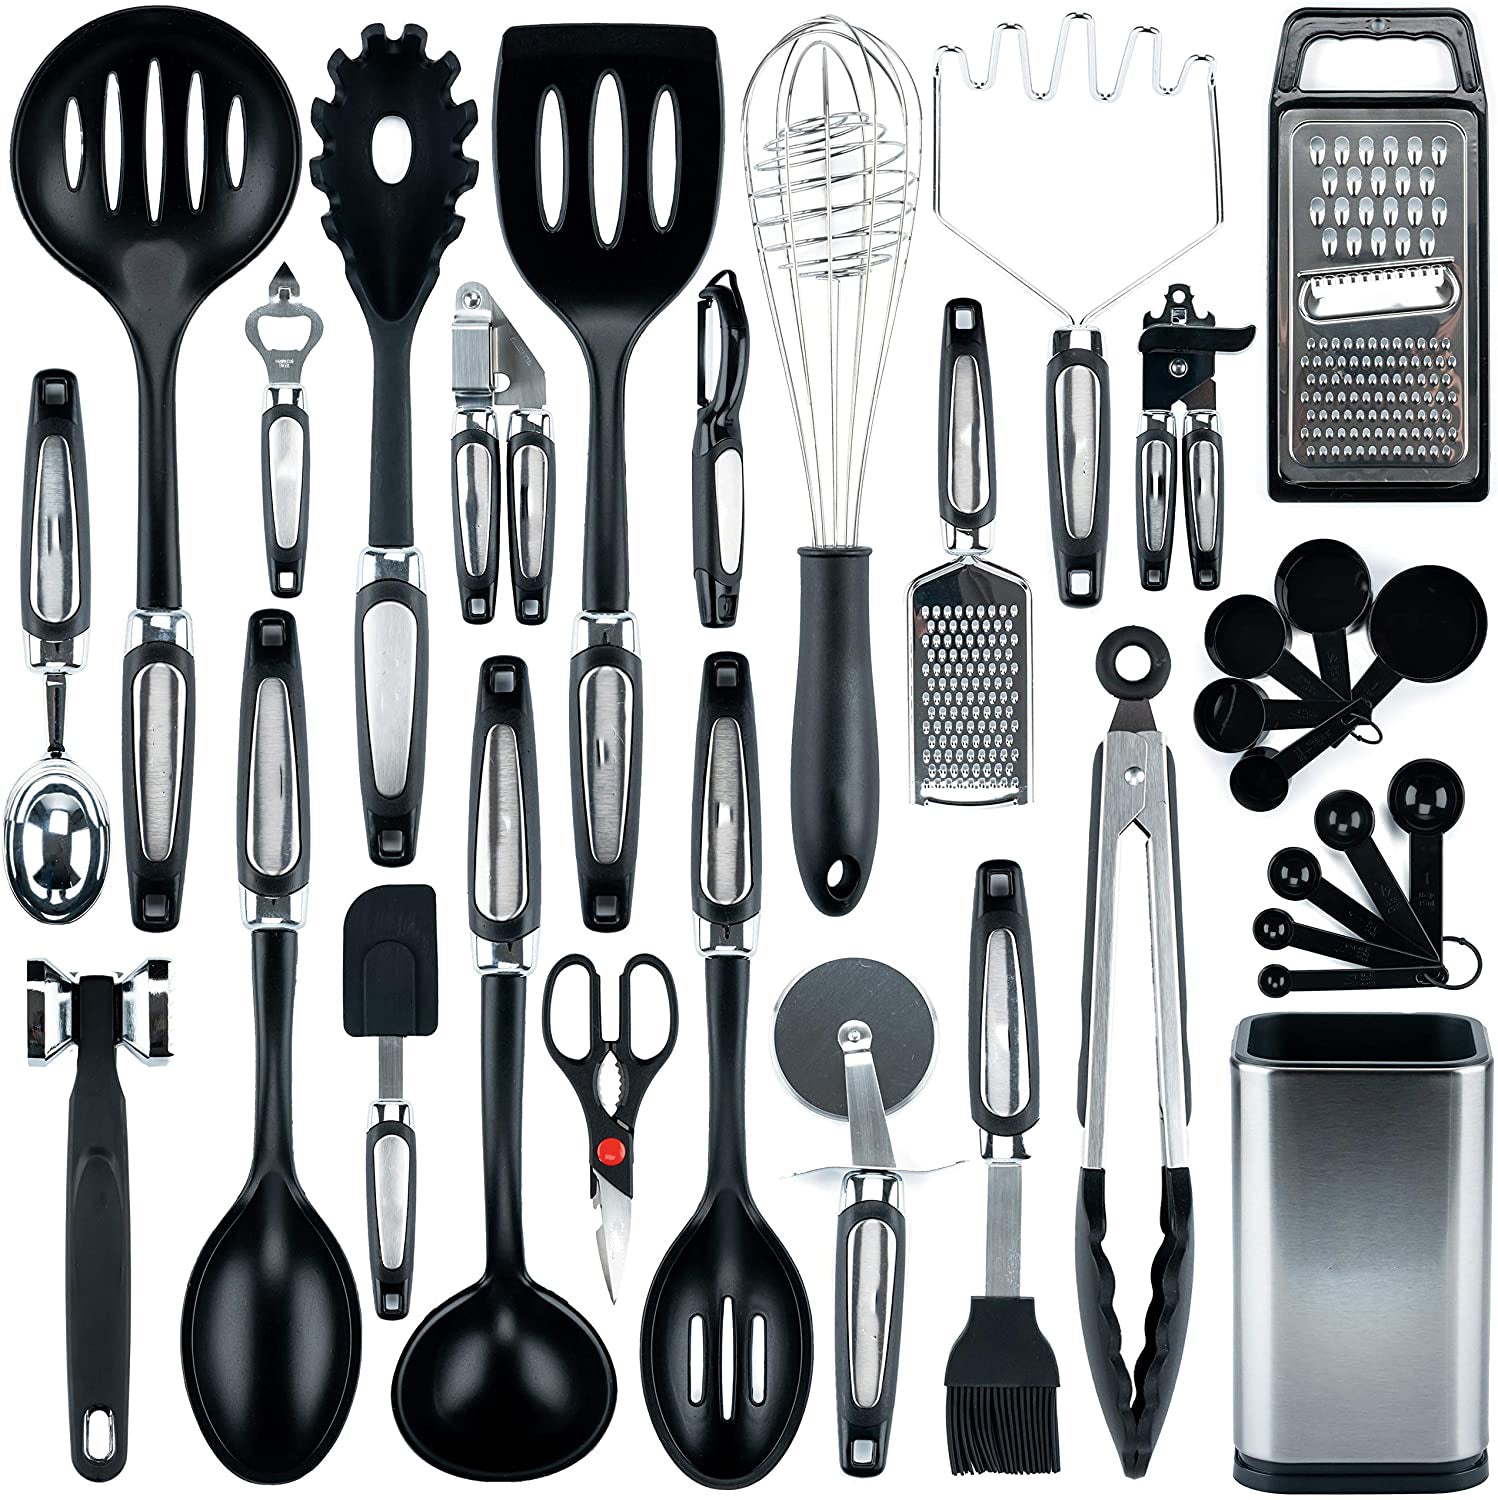 Cooking Utensil Set Silicone: Gift/Send Home Gifts Online JVS1215099  |IGP.com